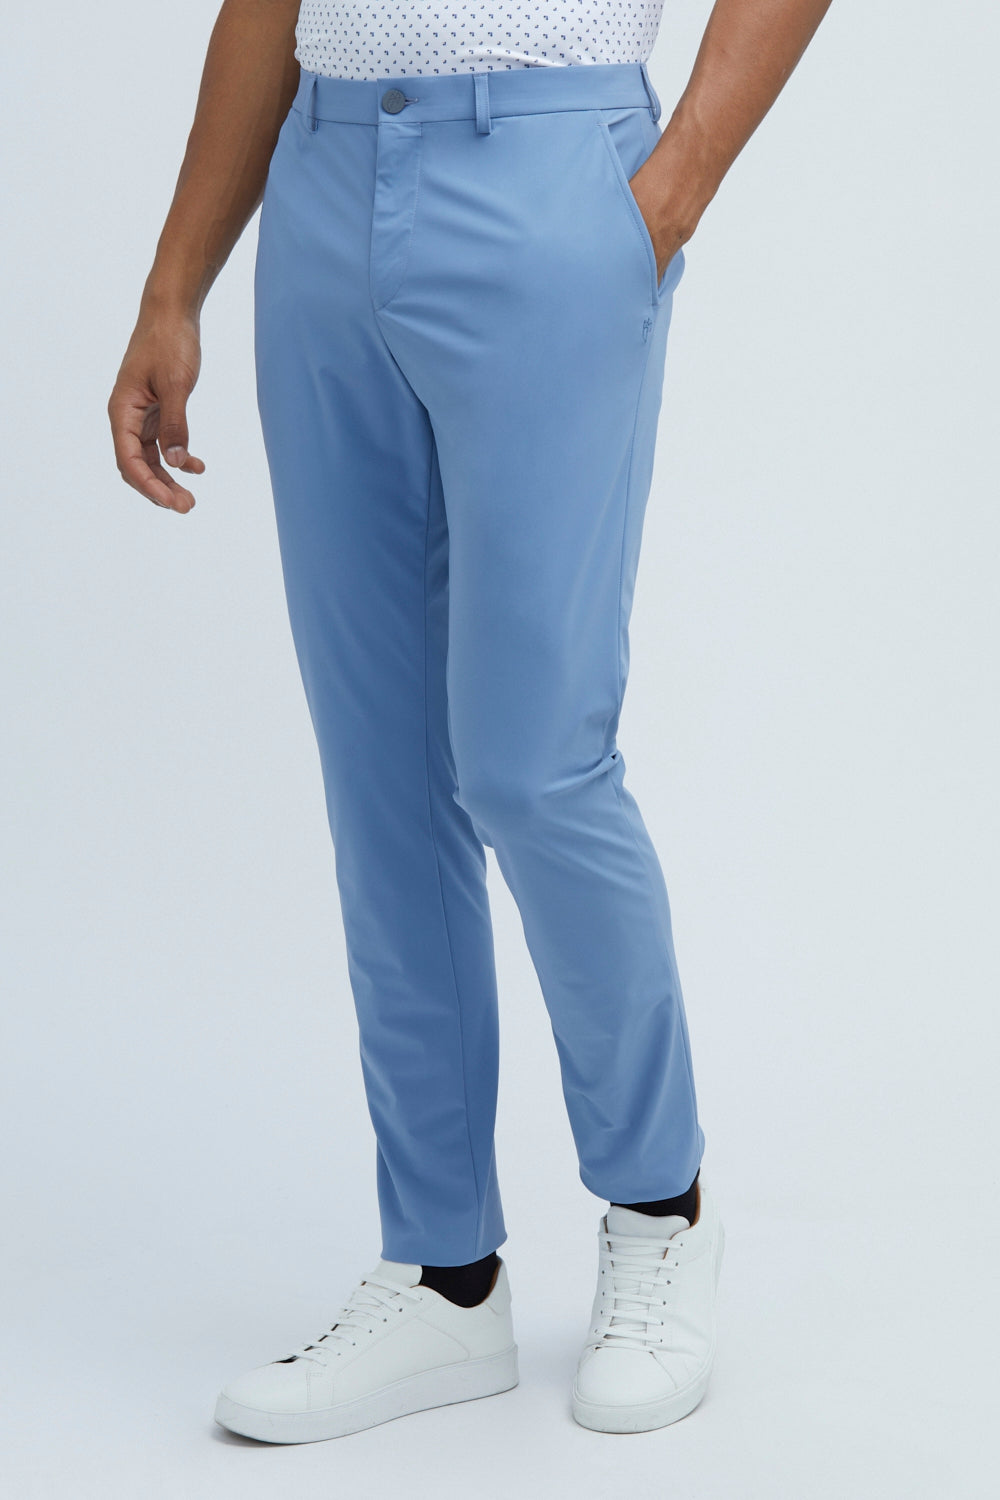 Sustainable Men's Powder Blue Chino Pants - State of Matter Apparel